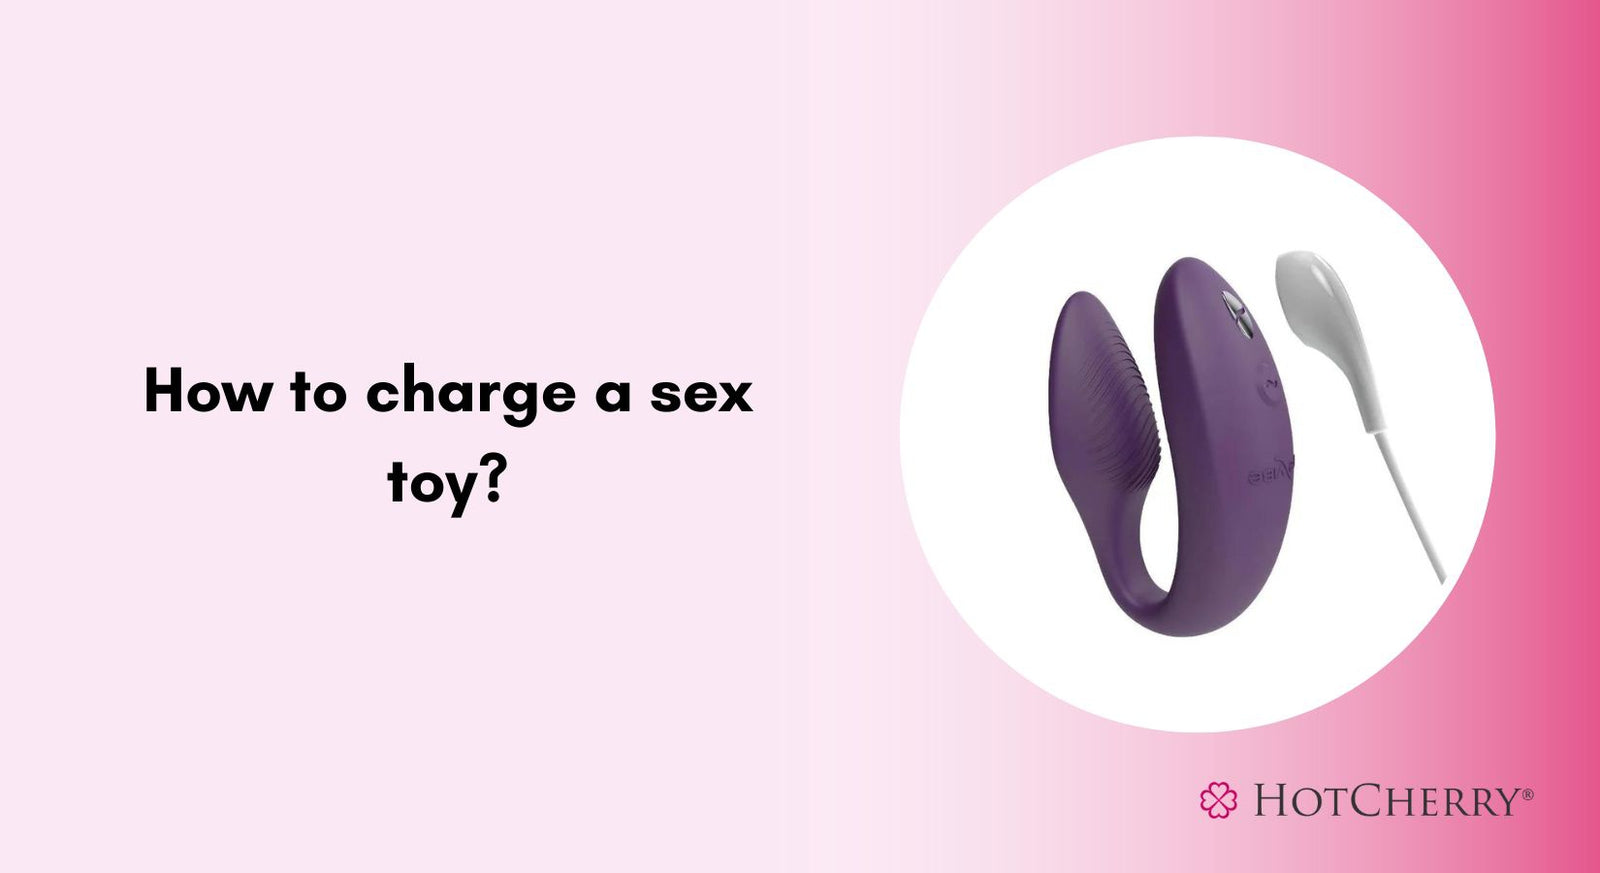 How to Charge a Sex Toy?